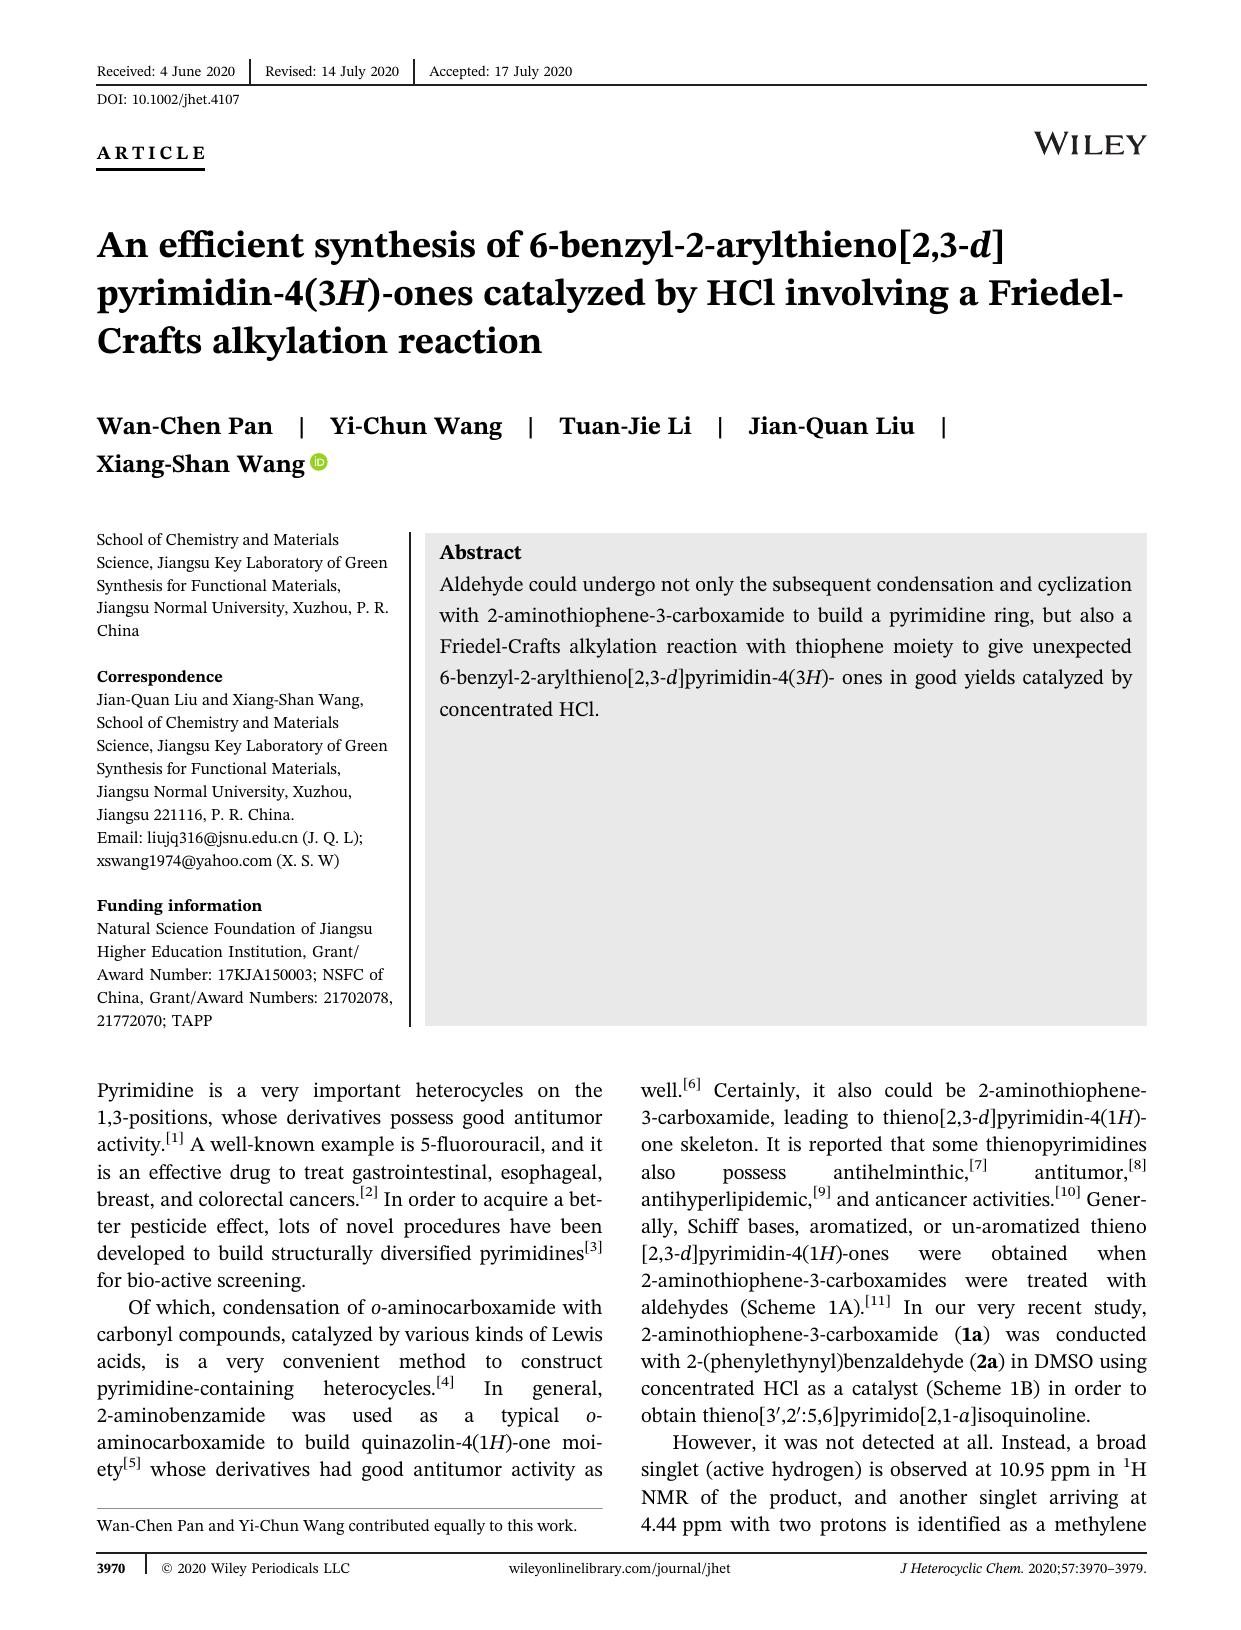 An efficient synthesis of 6-benzyl-2-arylthieno[2,3-d]pyrimidin-4(3H)-ones catalyzed by HCl involving a Friedel-Crafts alkylation reaction by Unknown